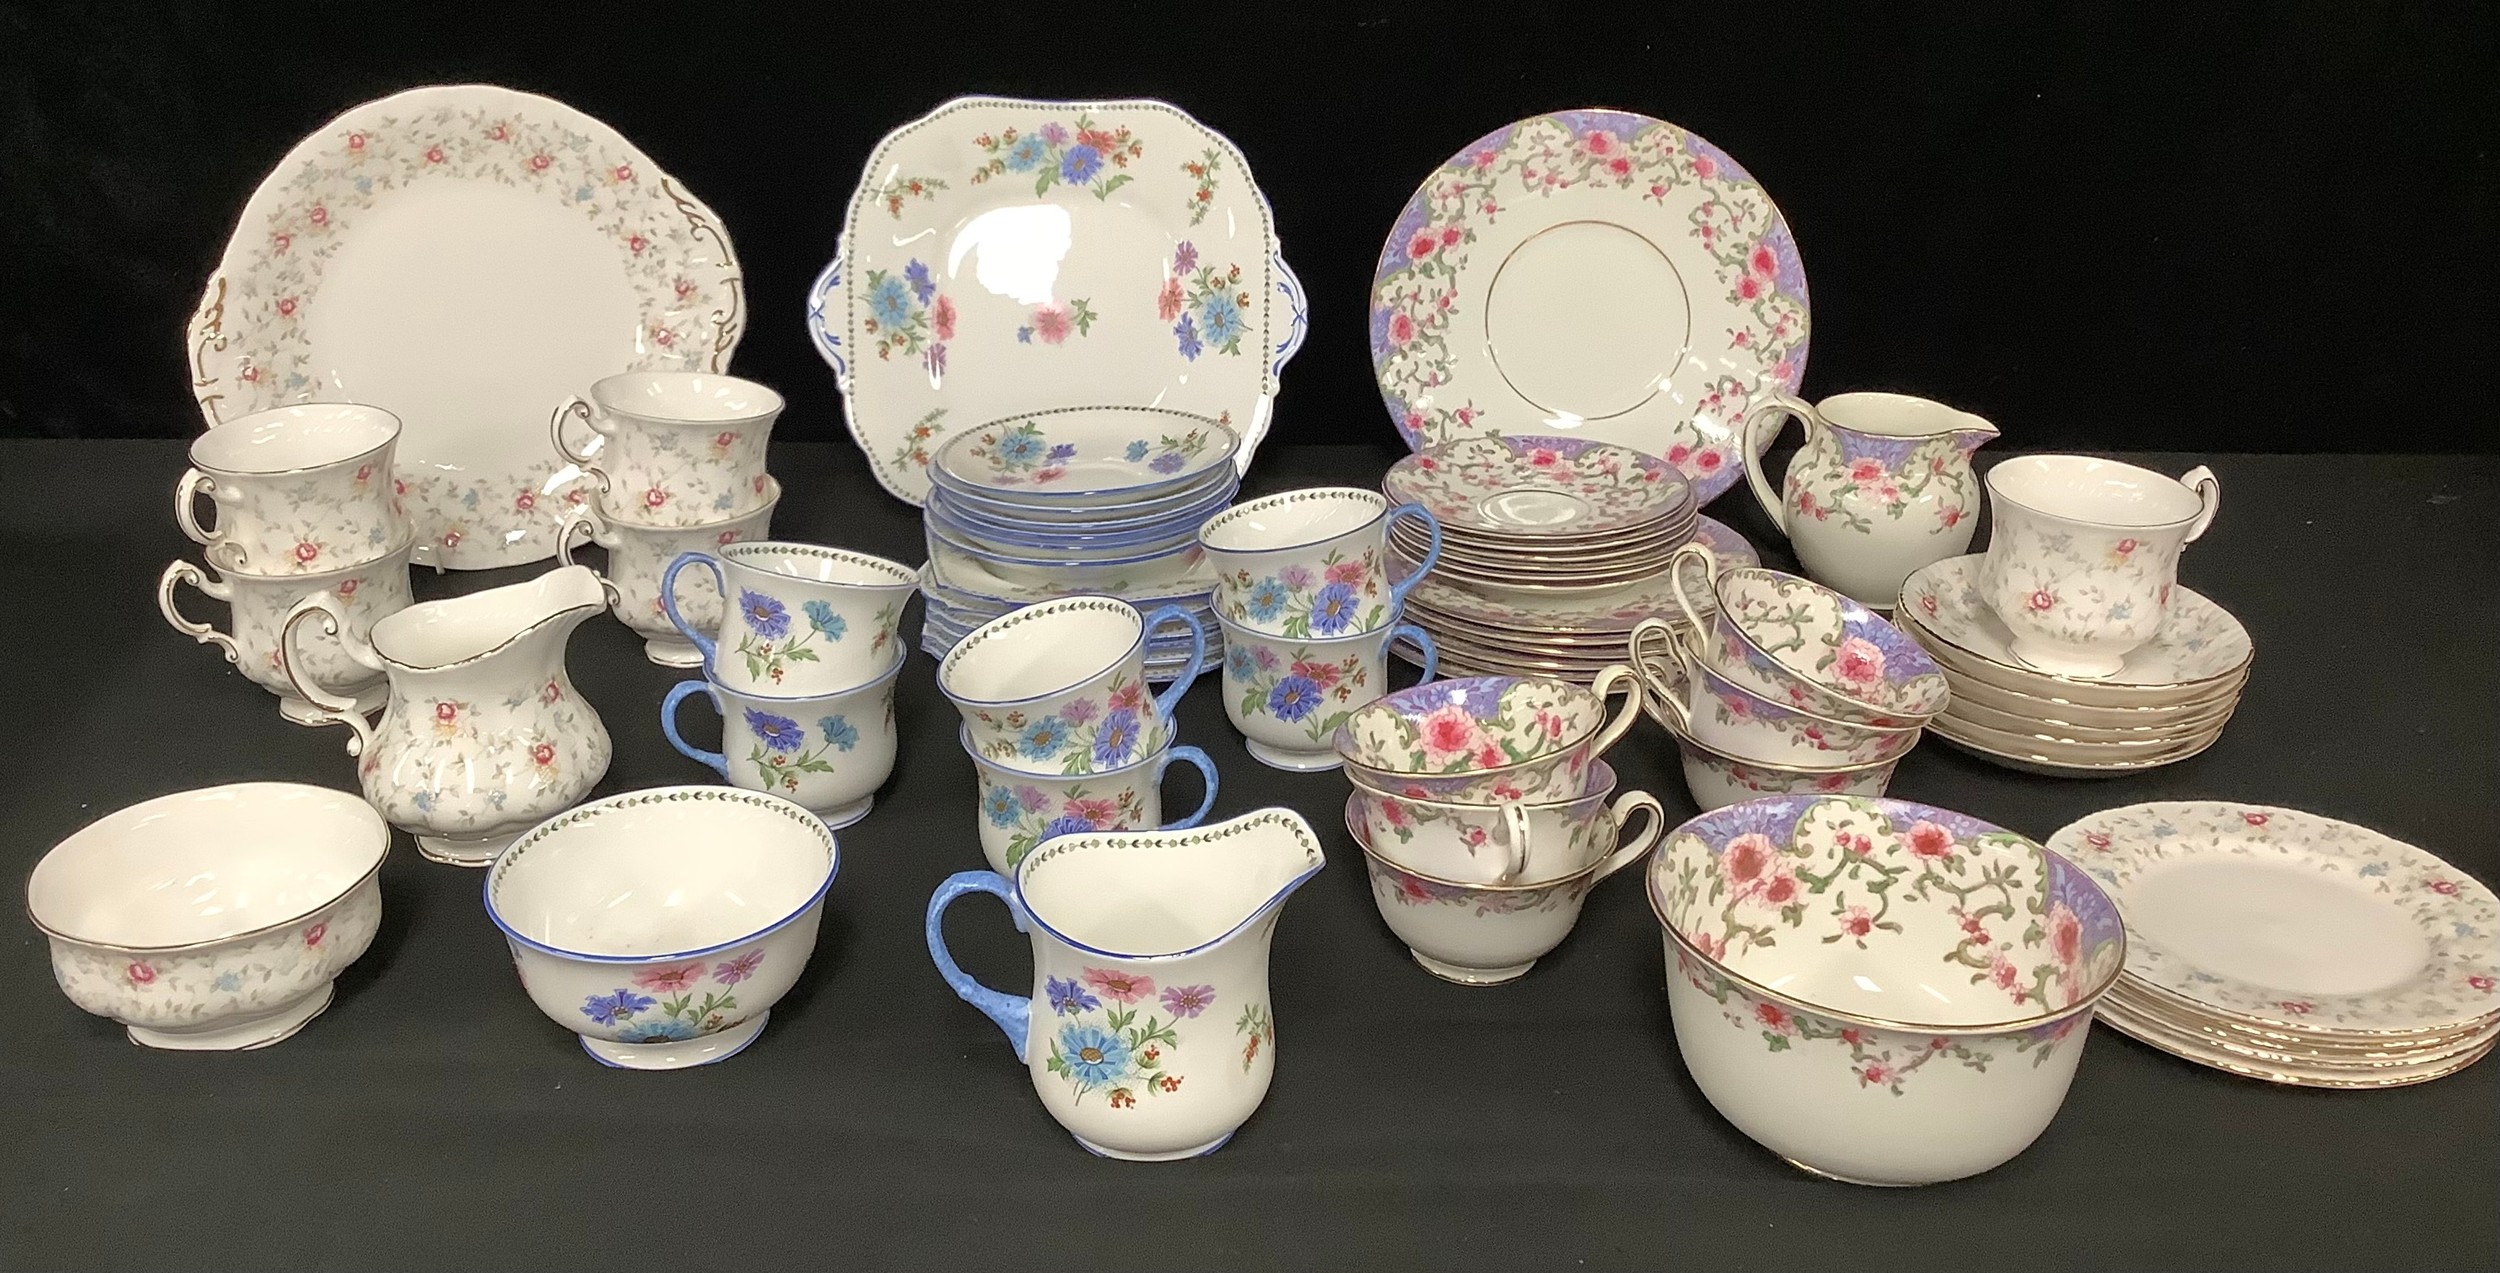 An Aynsley tea service for six, decorated with stylised pink and blue flowers, comprising cake